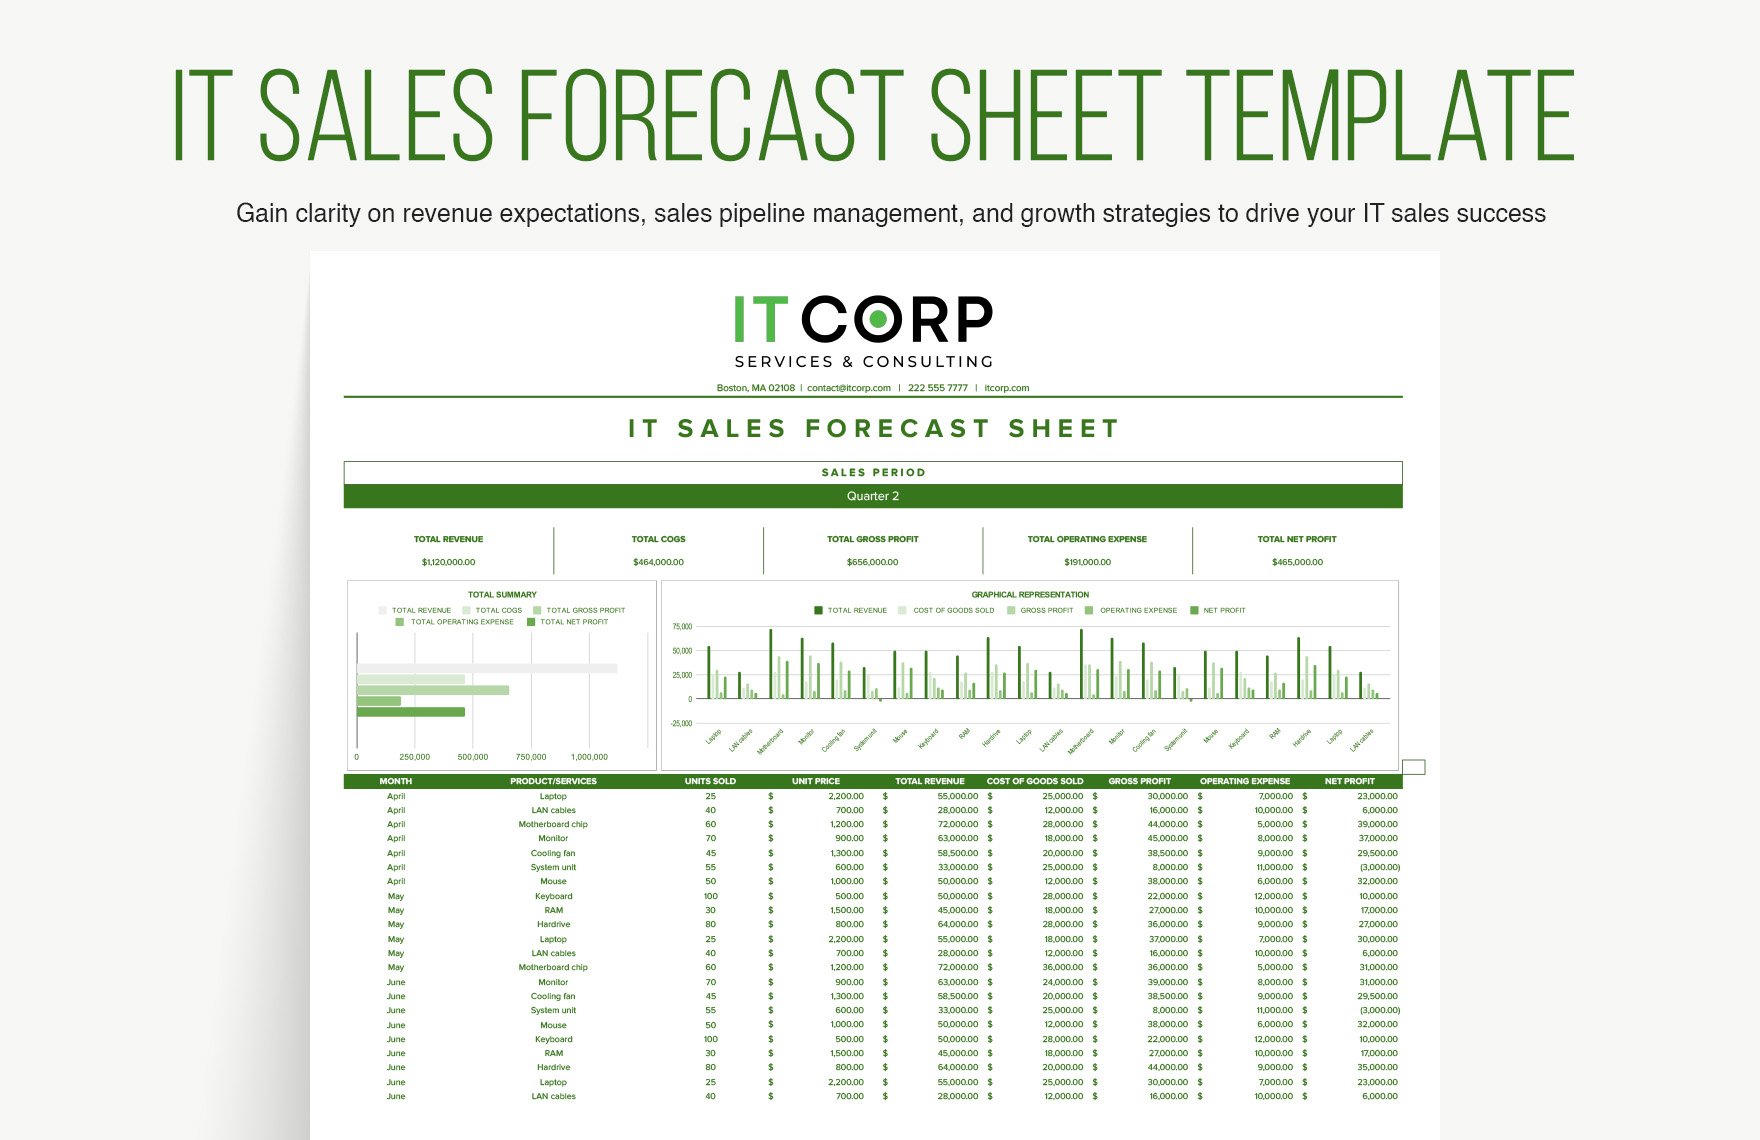 IT Sales Forecast Sheet Template in Excel, Google Sheets